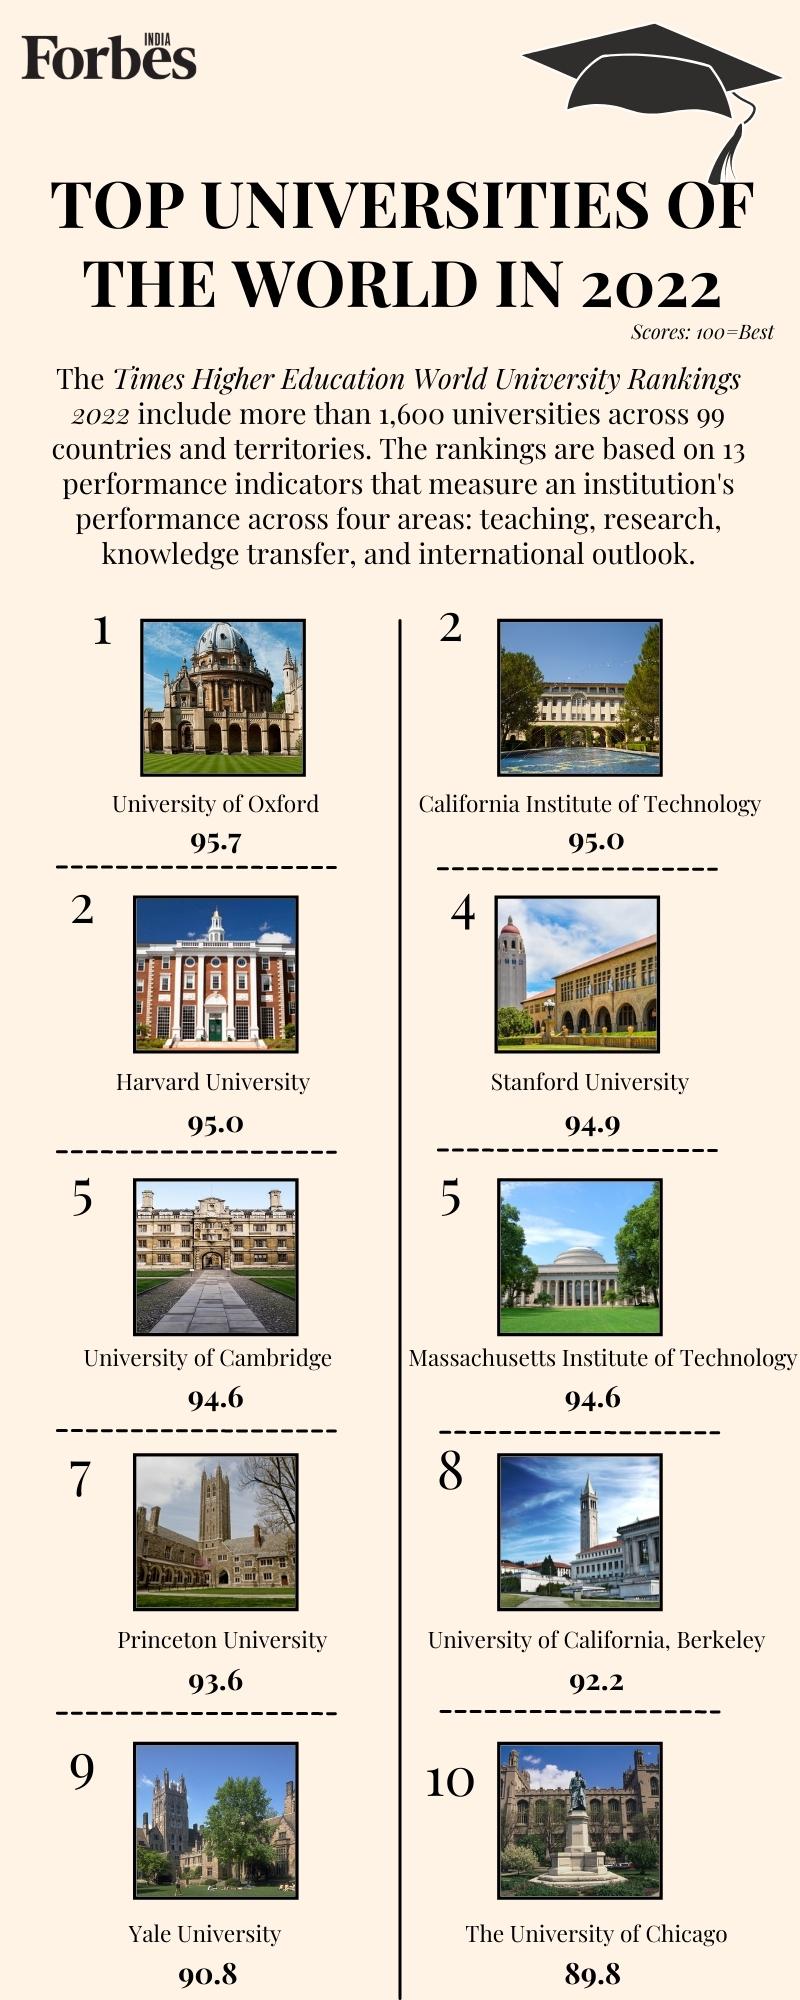 Oxford University best in the world in 2022: report